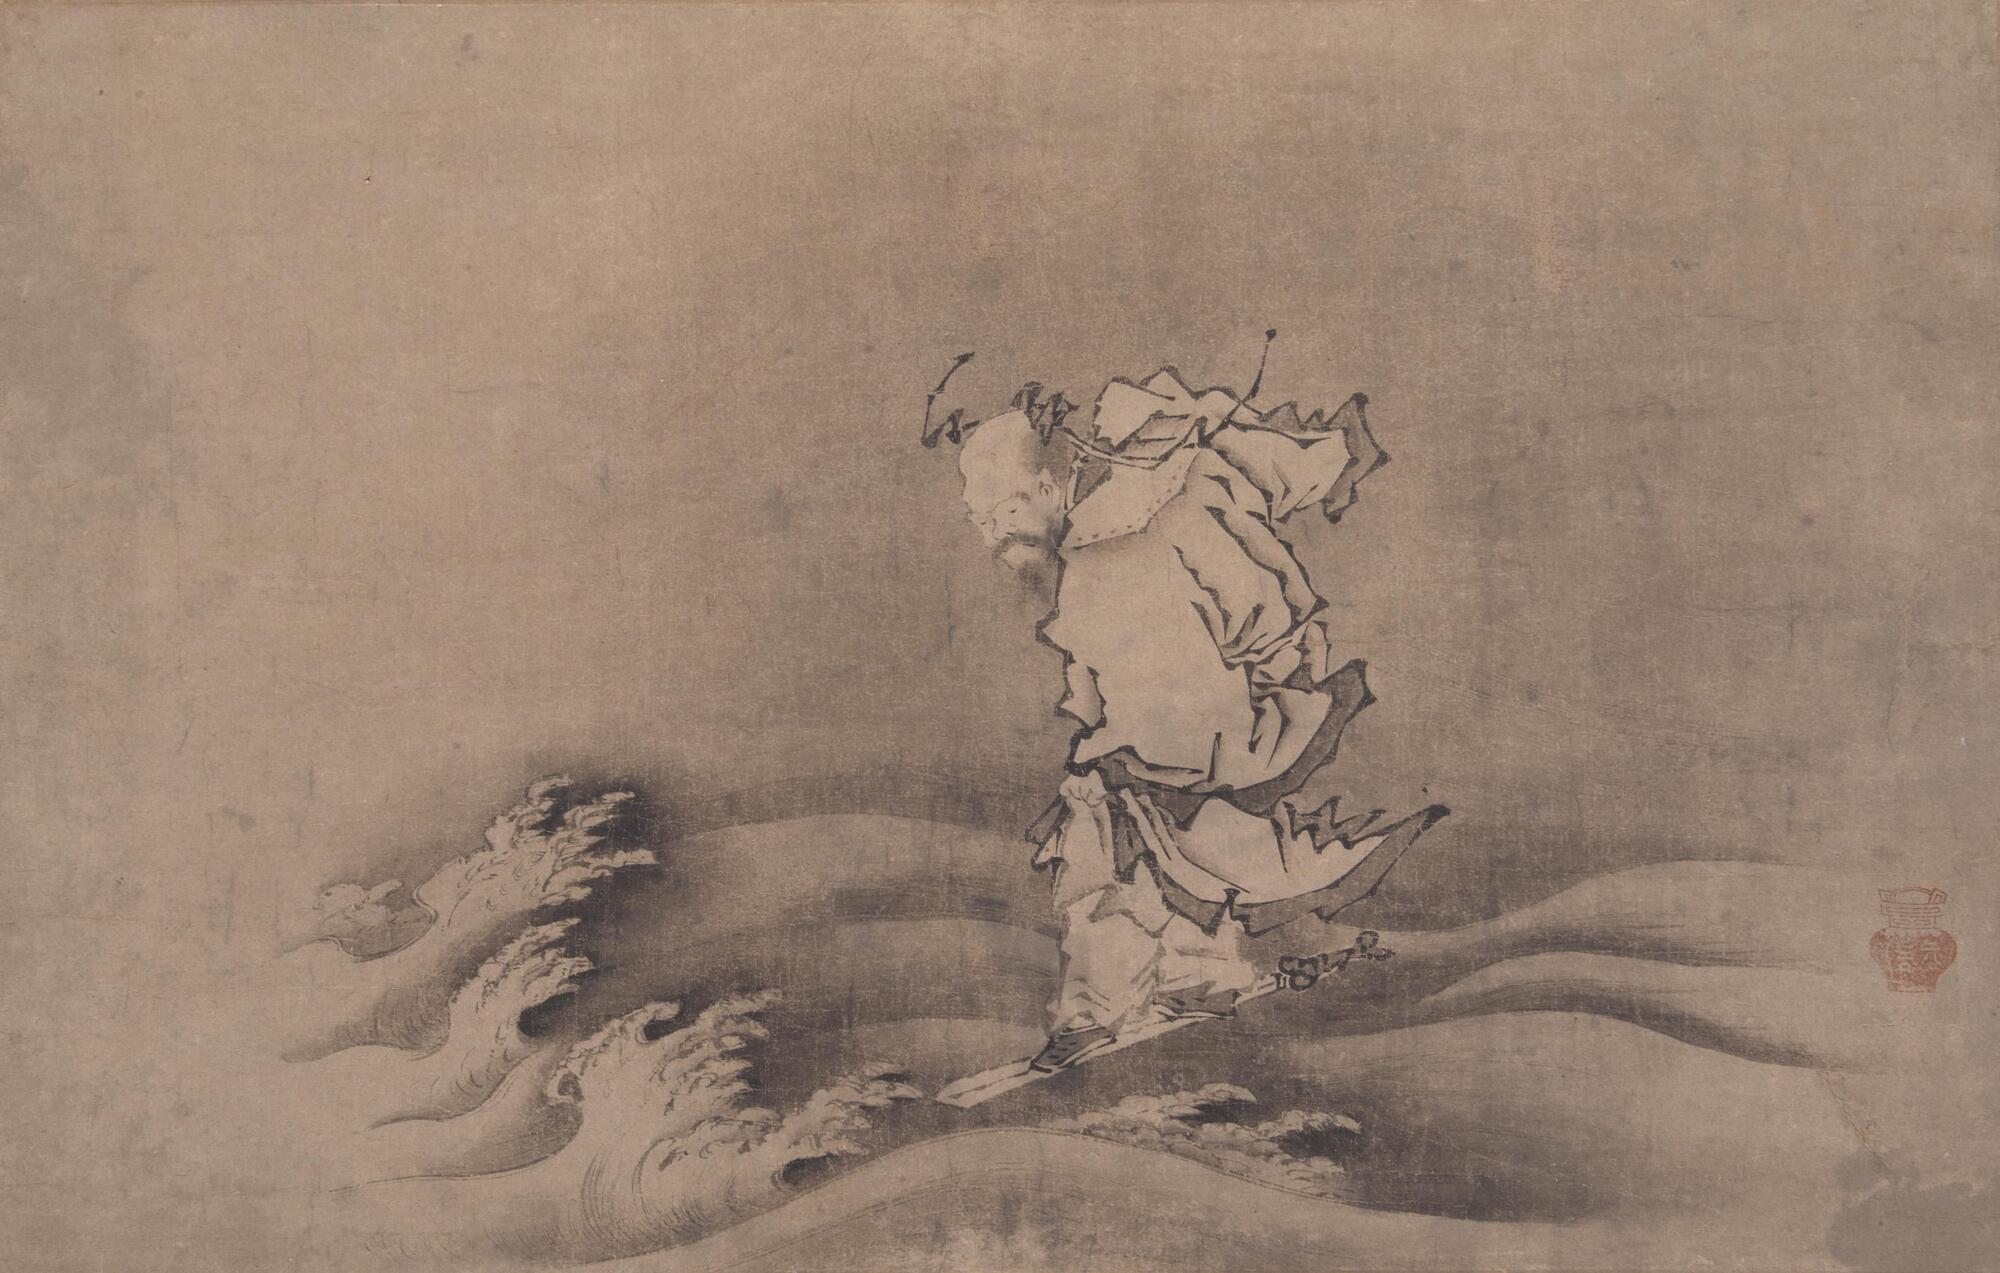 This painting shows a scholar that is riding with his feet on a sword across waves. There is a seal on the lower right corner of the painting that reads Motonobu, referring to Kan&ocirc; Motonobu.<br />
<br />
&nbsp;